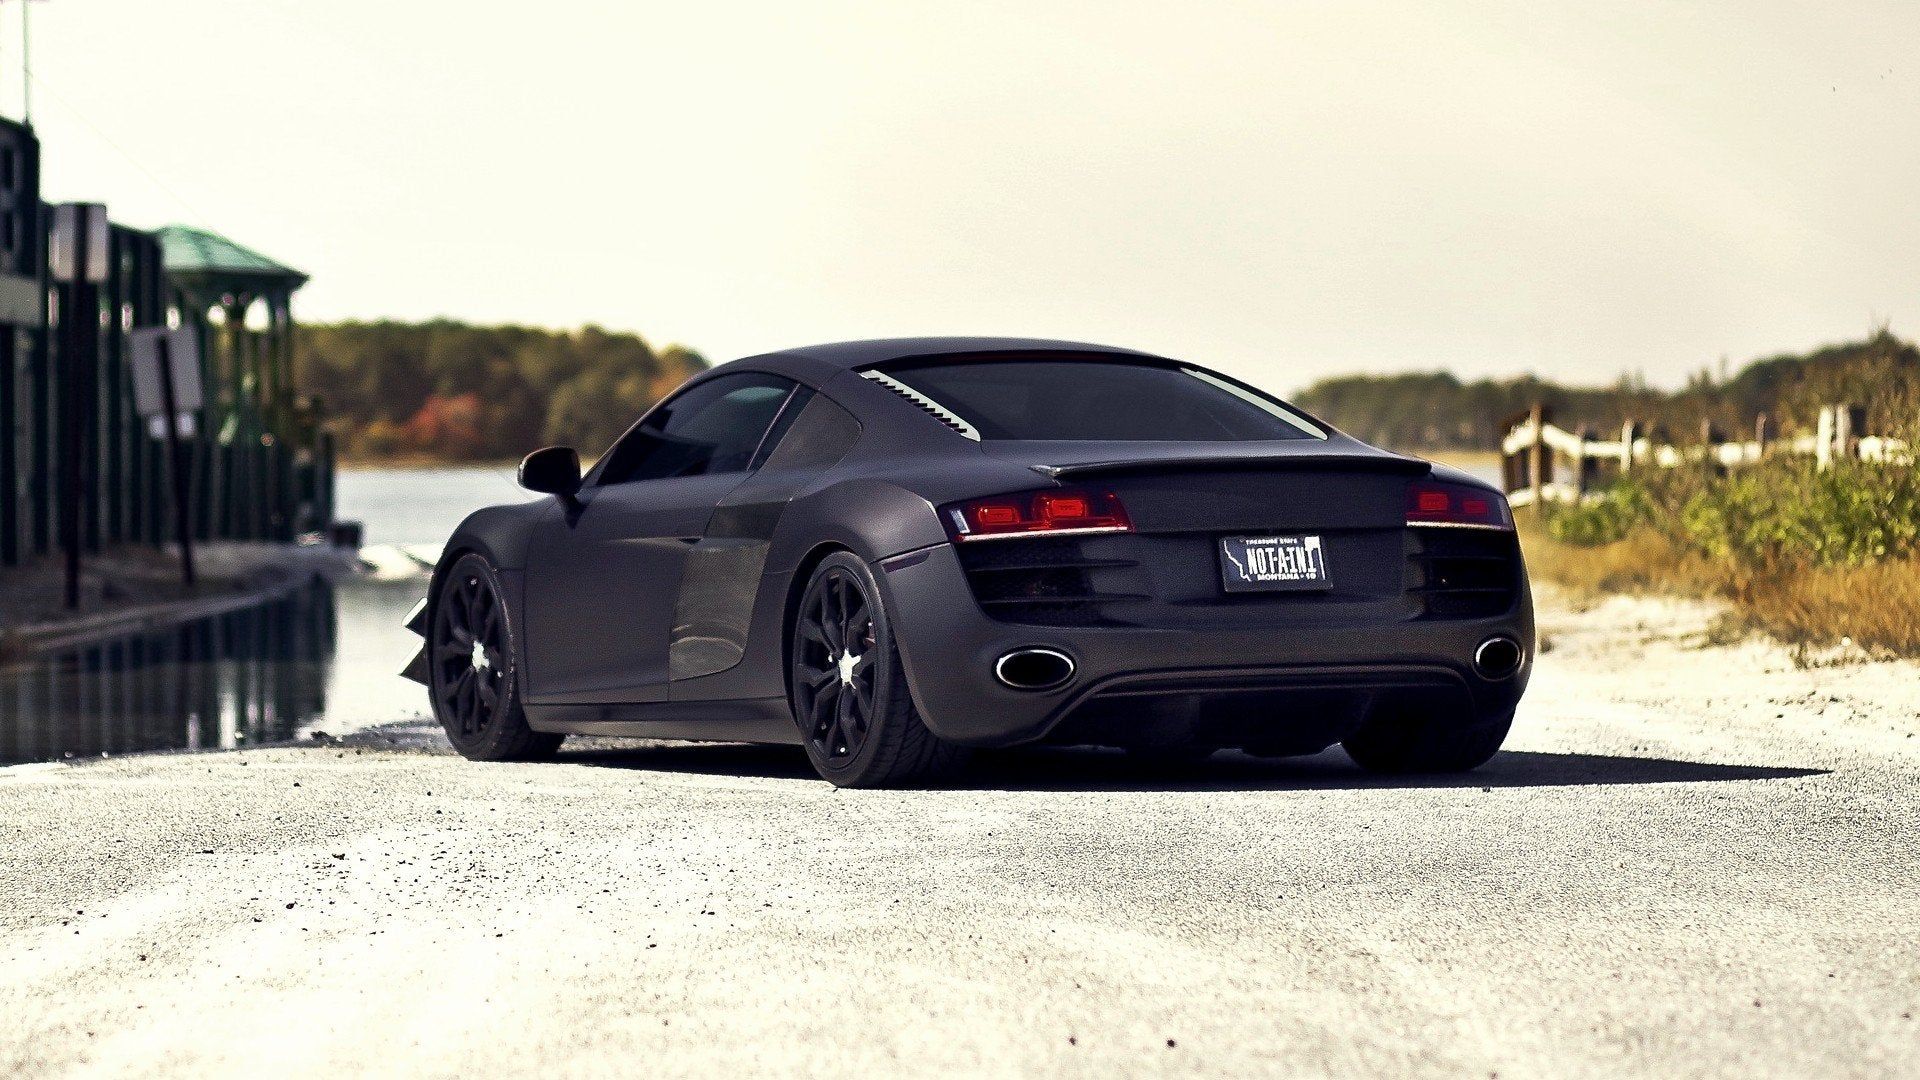 Blacked Out Audi R8 [1920x1080]